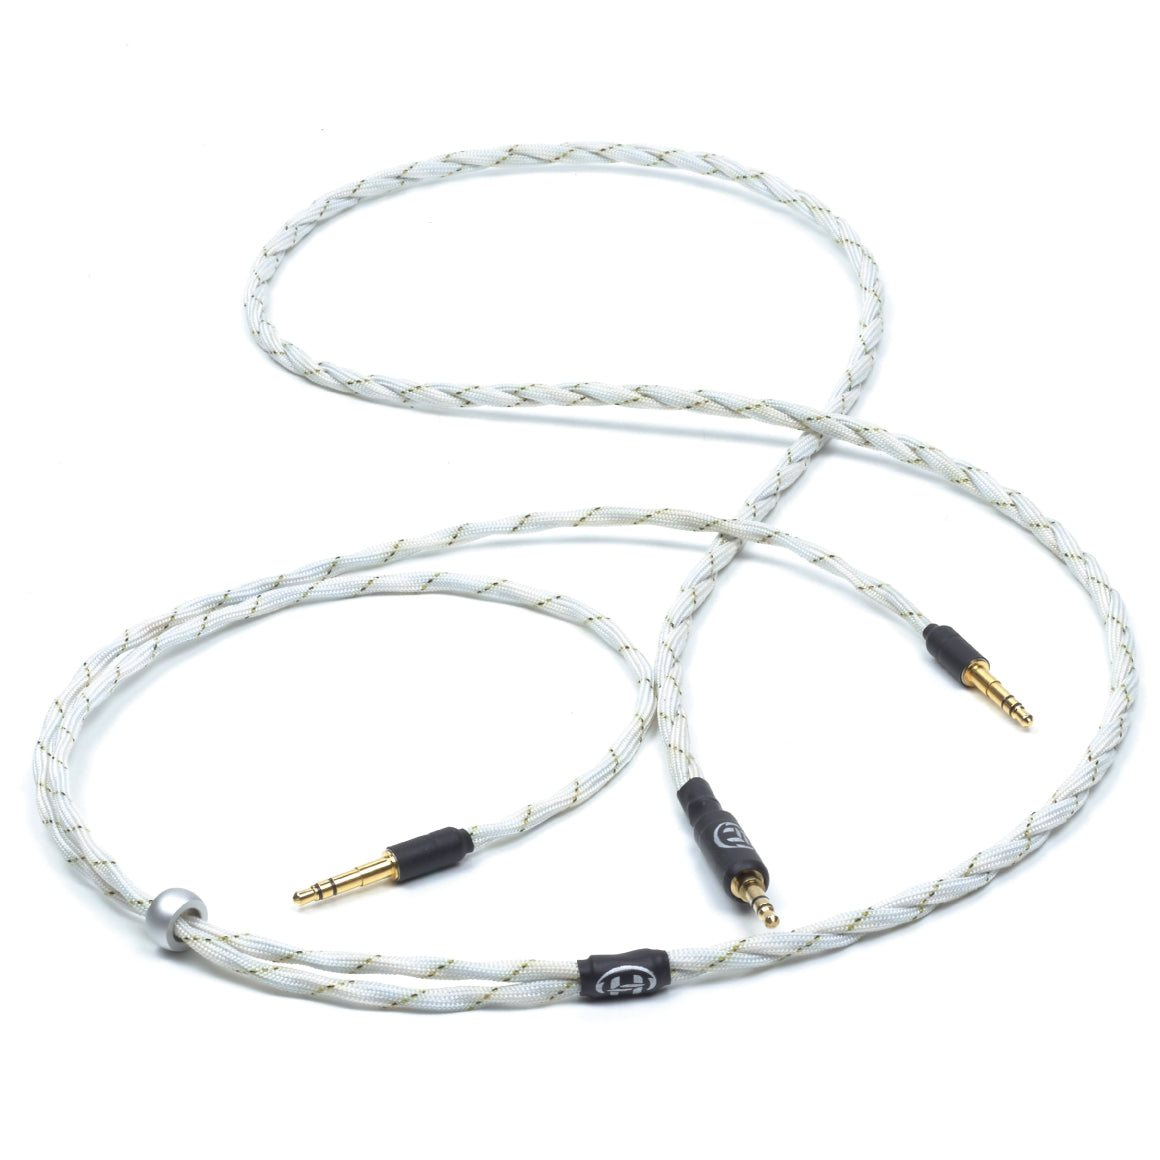 Headphone-Zone-Headgear Audio - Upgrade Cable for Beyerdynamic T1 2nd Generation / T5p Second Generation/ Sleeved - 2.5mm TRRS Balanced For A&K And Onkyo